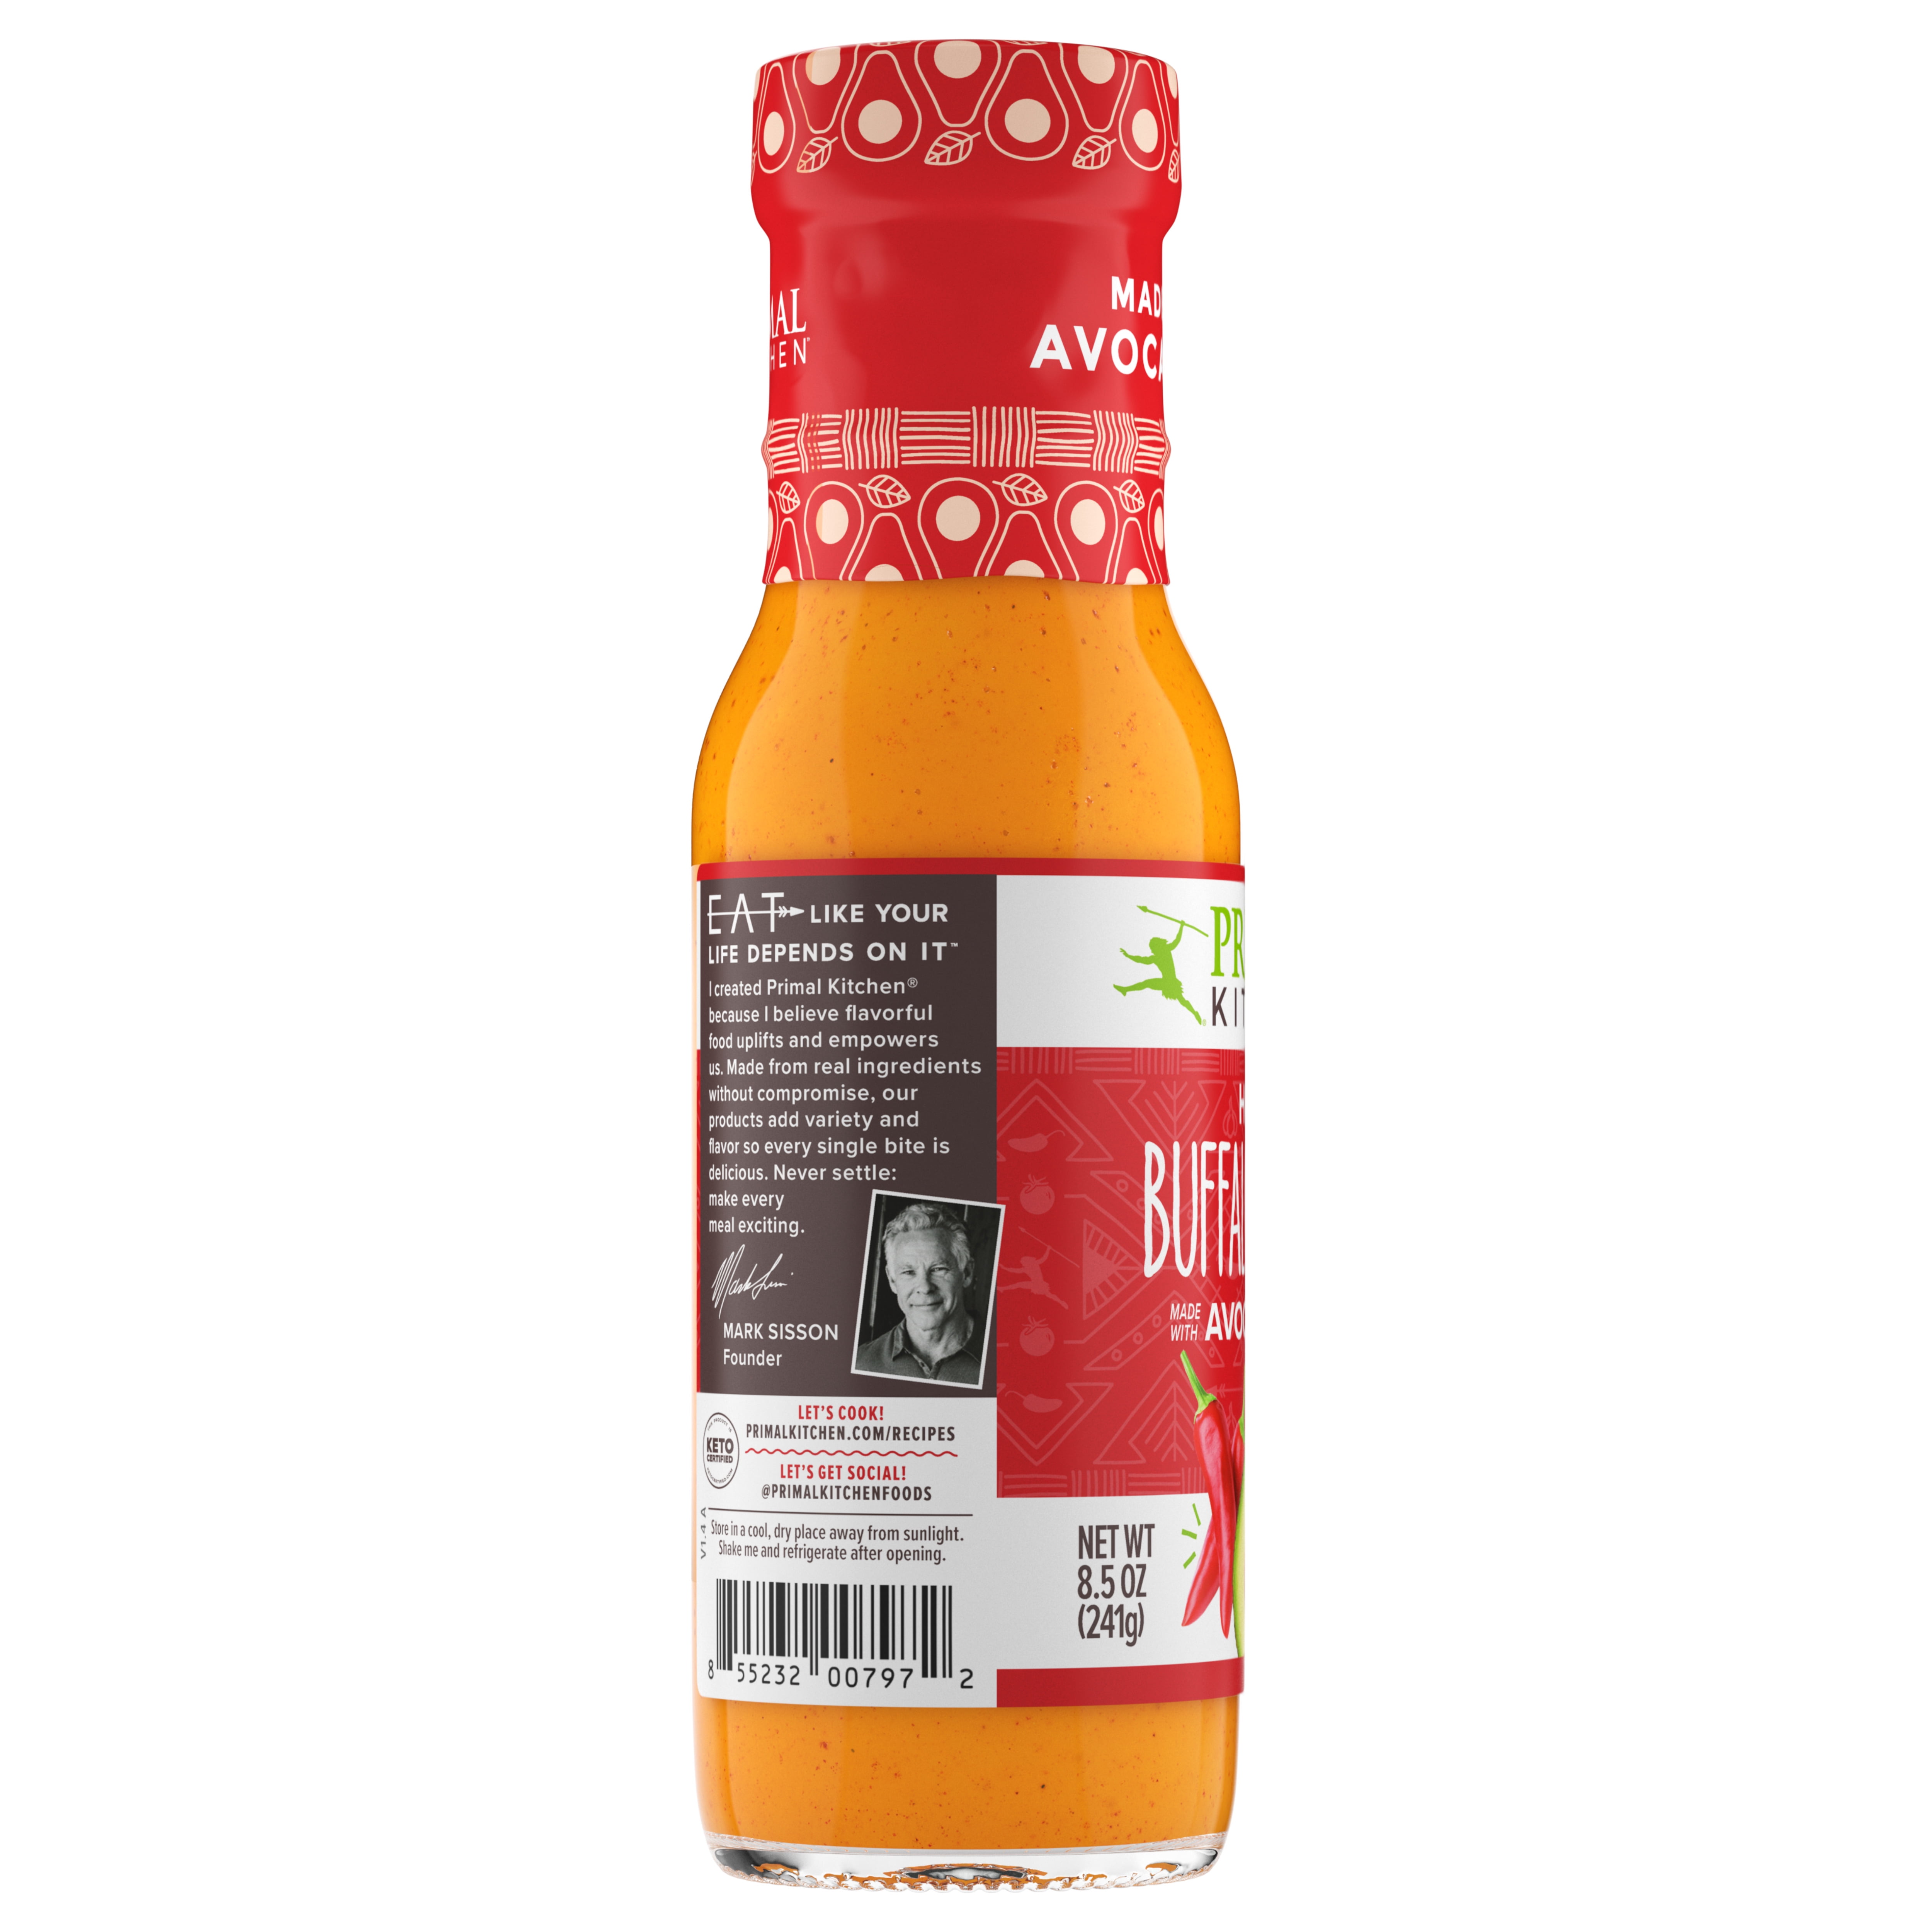 Get Primal Kitchen Buffalo Sauce For As Low As $1.99 At Publix (Regular  Price $6.89) - iHeartPublix